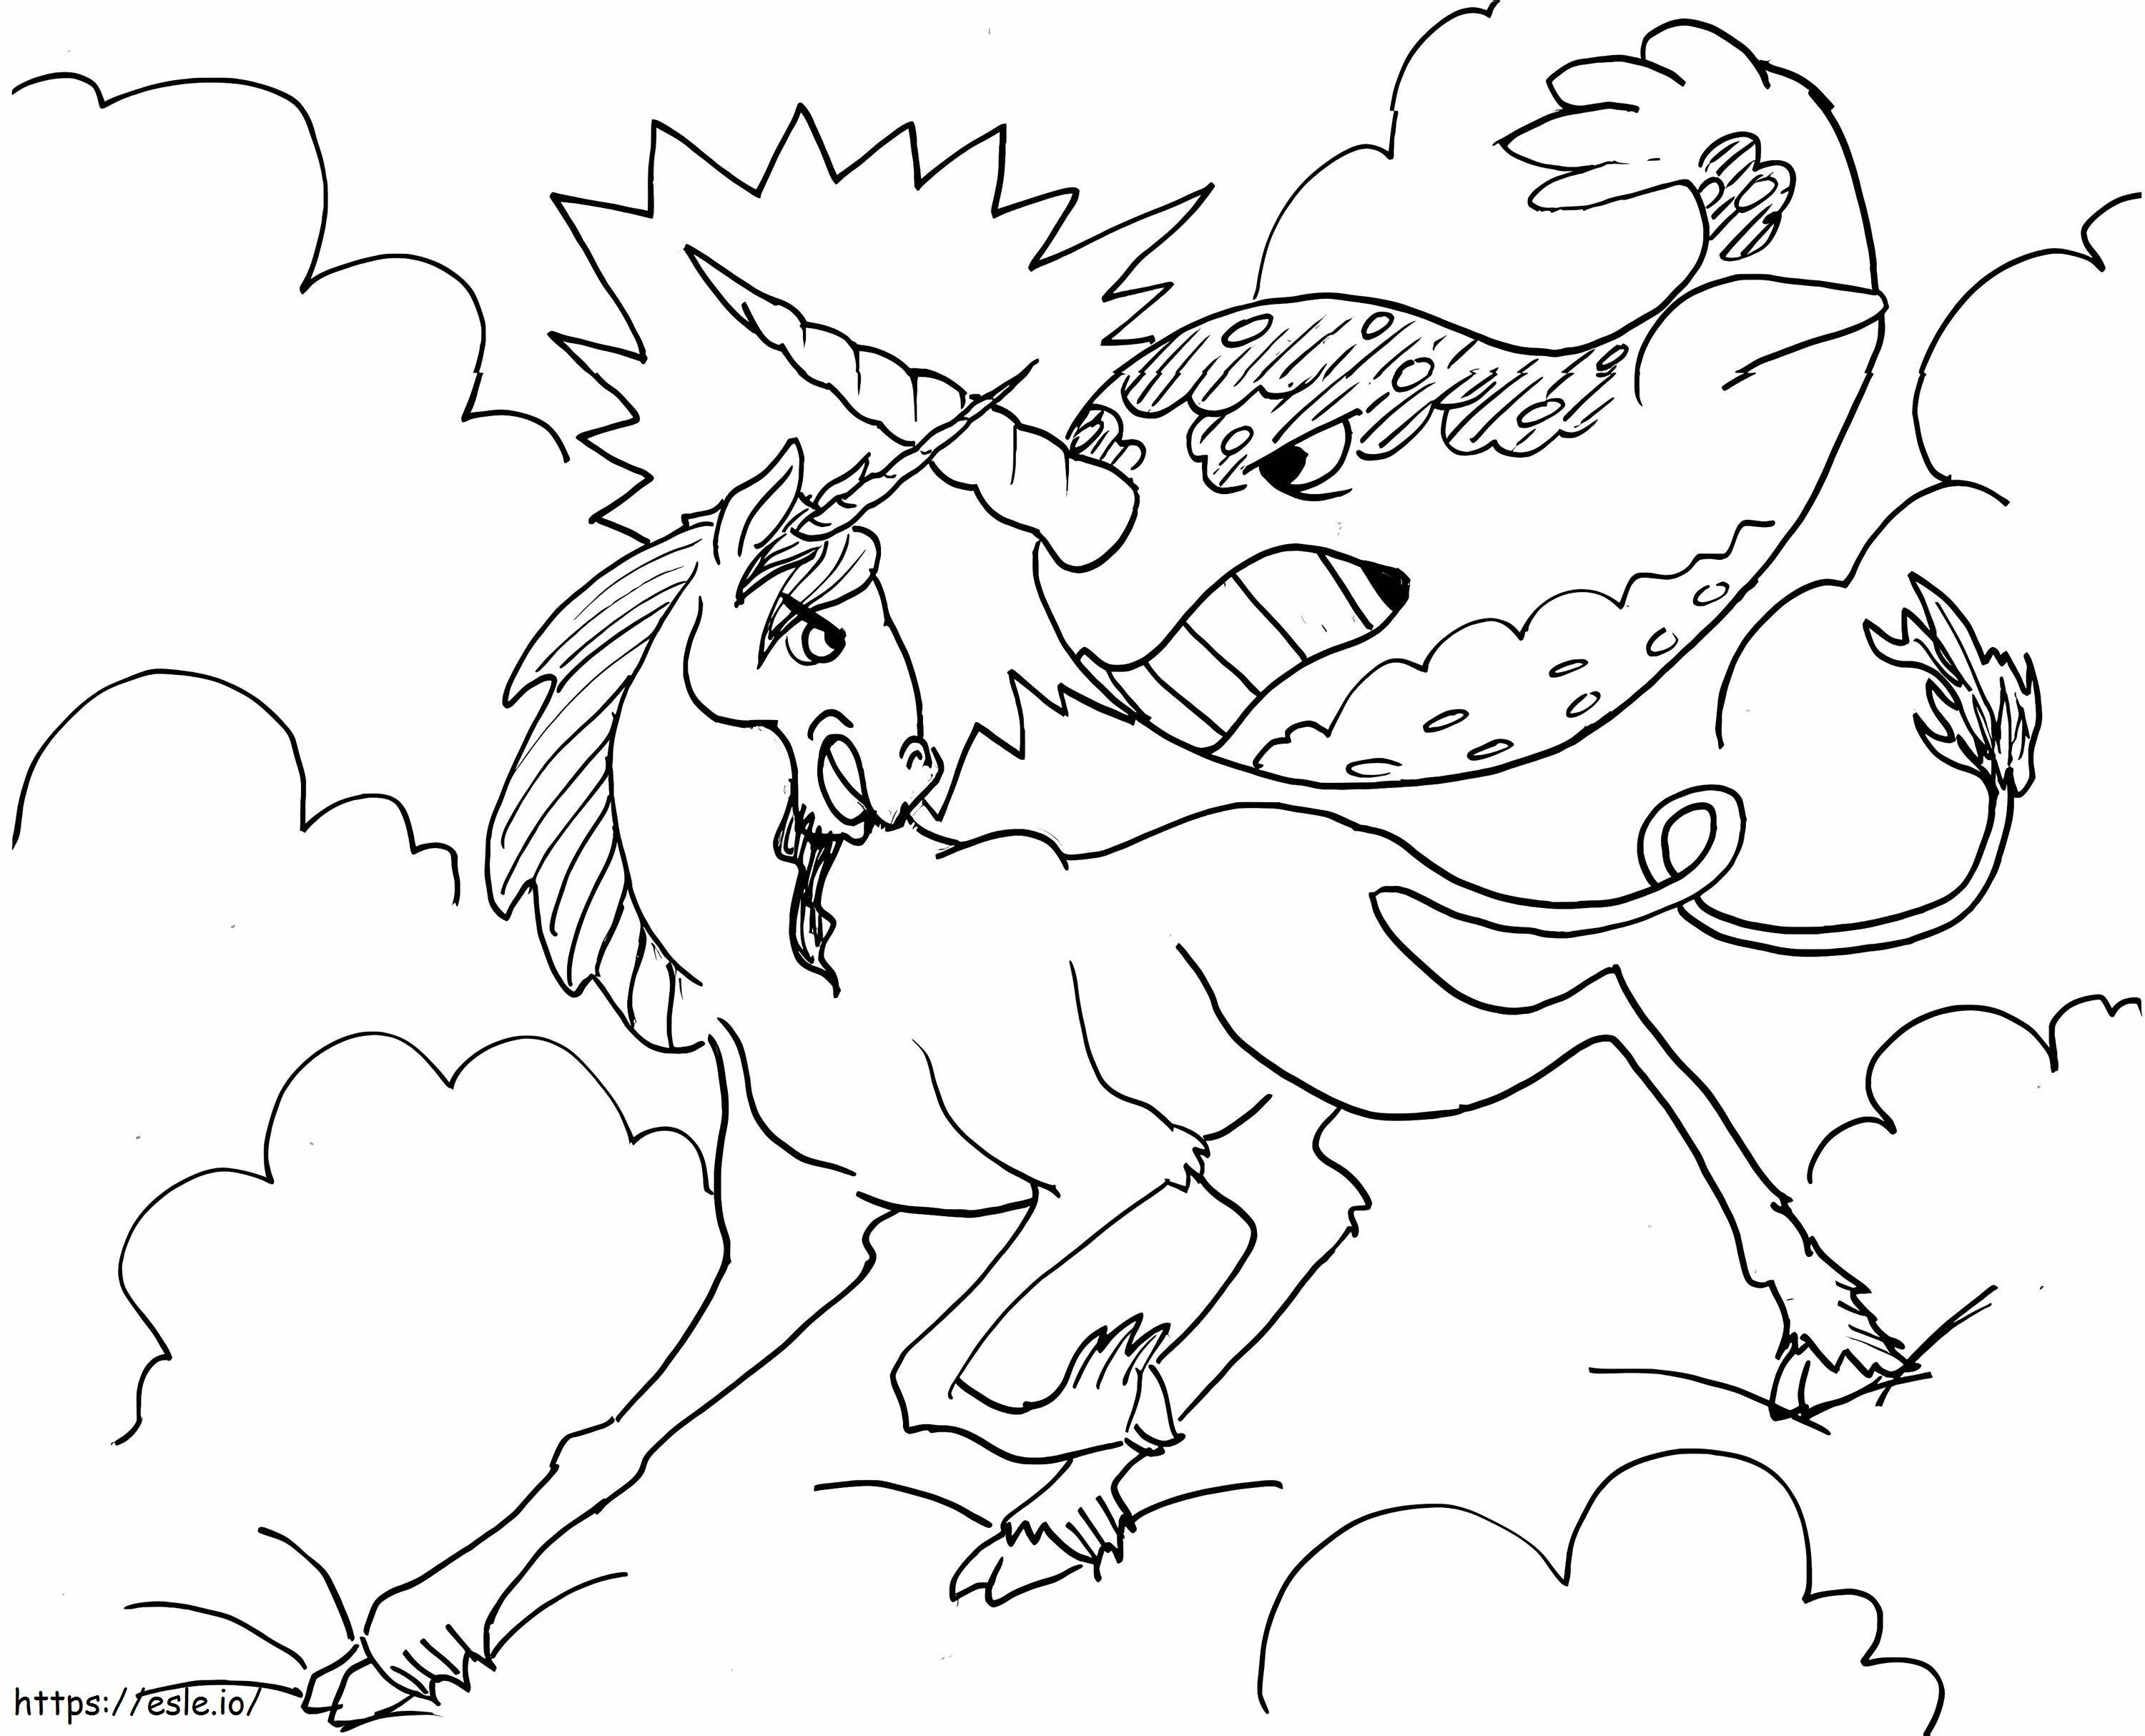 Unicorn Vs Narwhal E1649470054195 coloring page